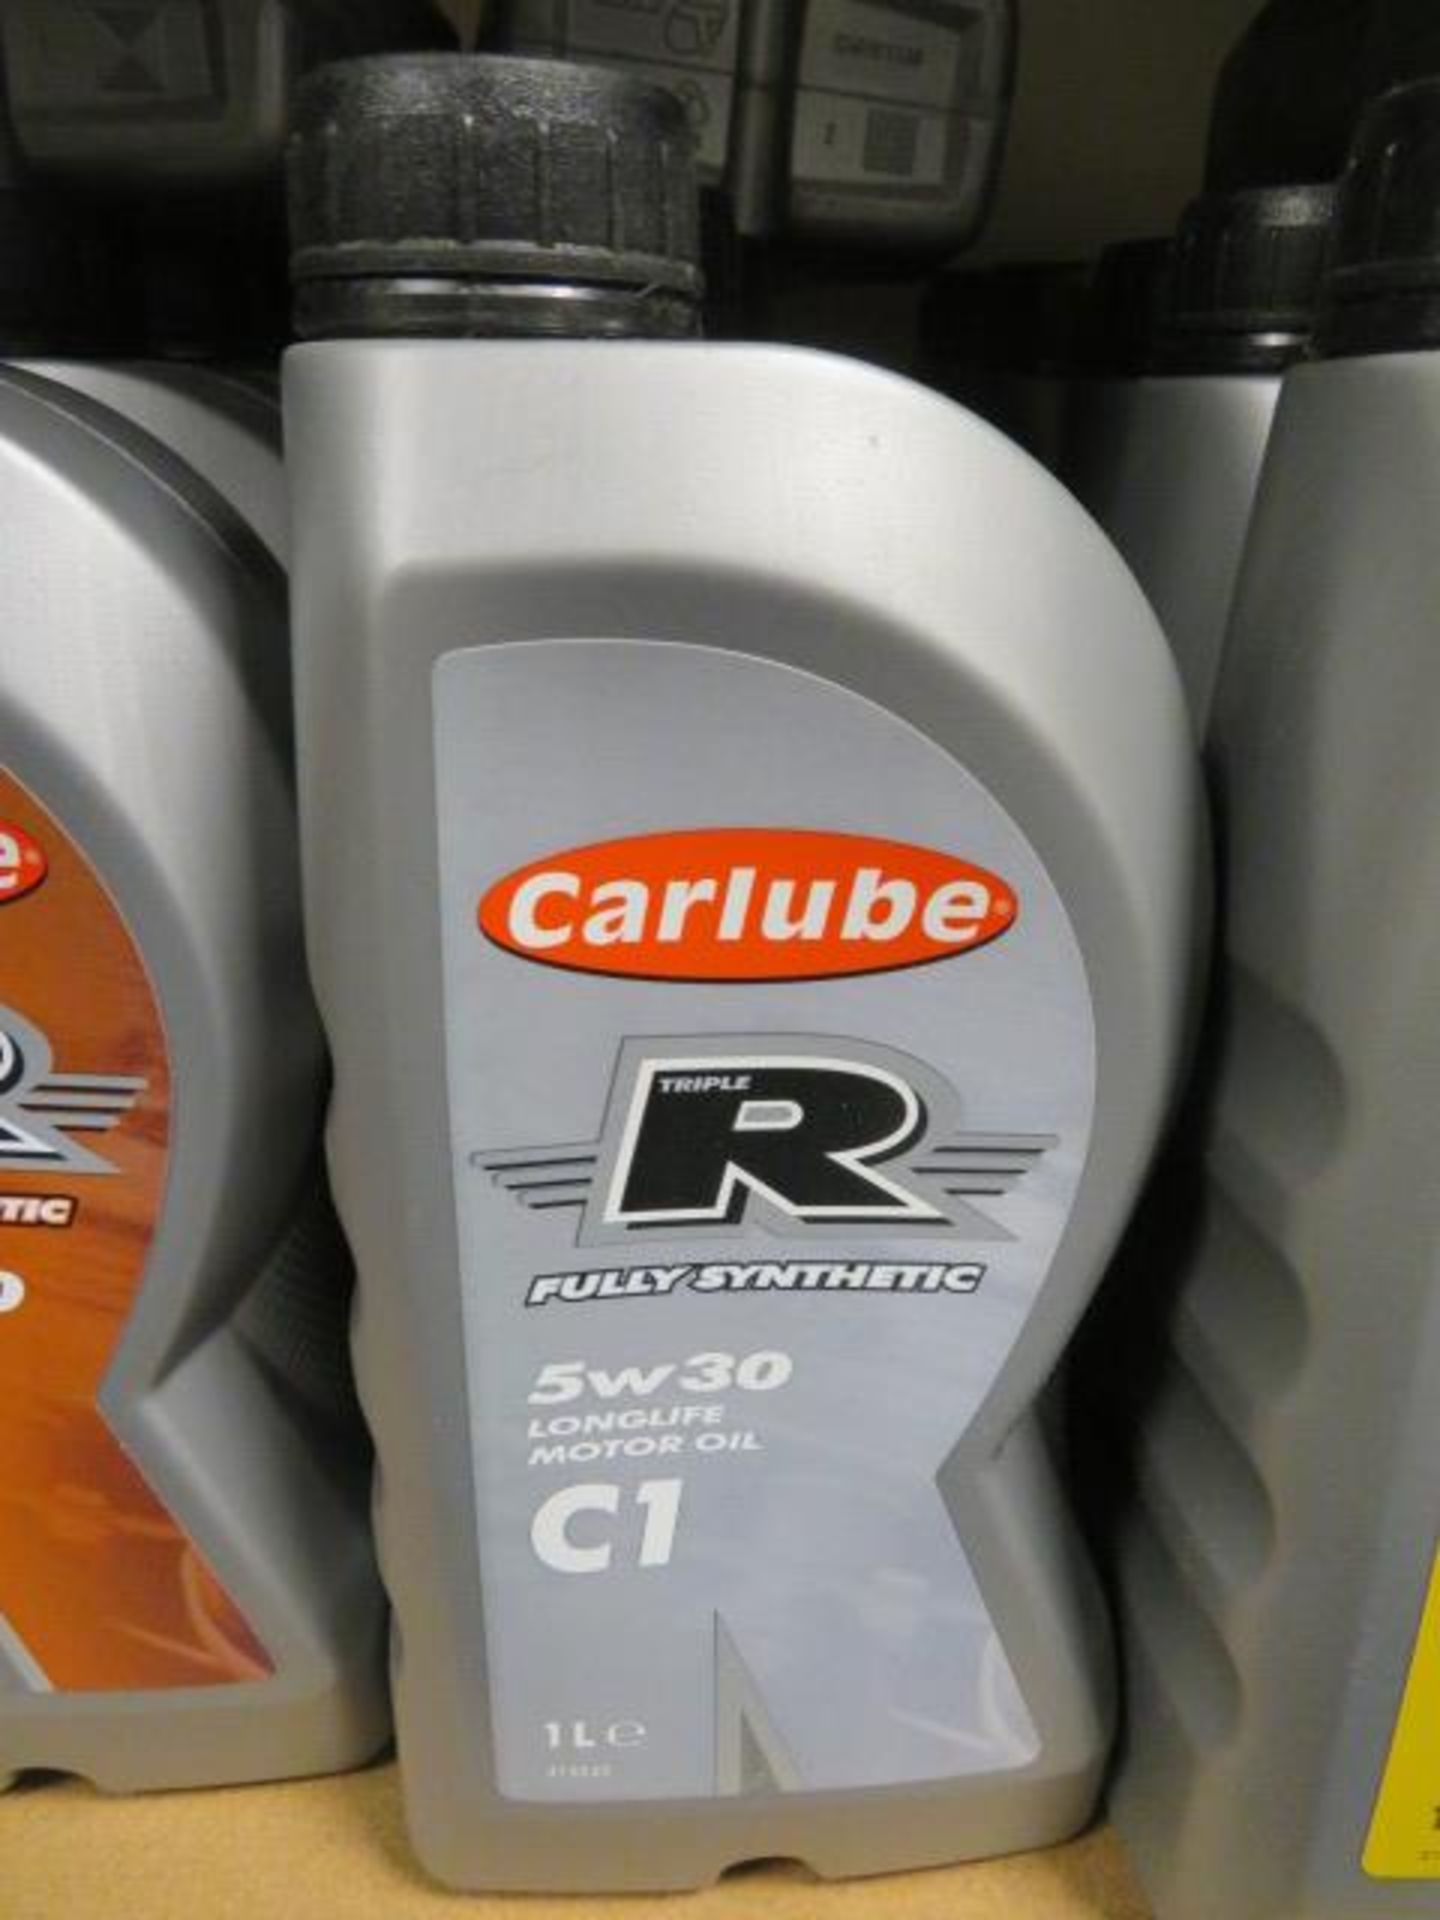 6 x CARLUBE TRIPLE R 5W30 LONGLIFE 1L FULLY SYNTHETIC MOTOR OIL. C1. UK DELIVERY AVAILABLE FROM...